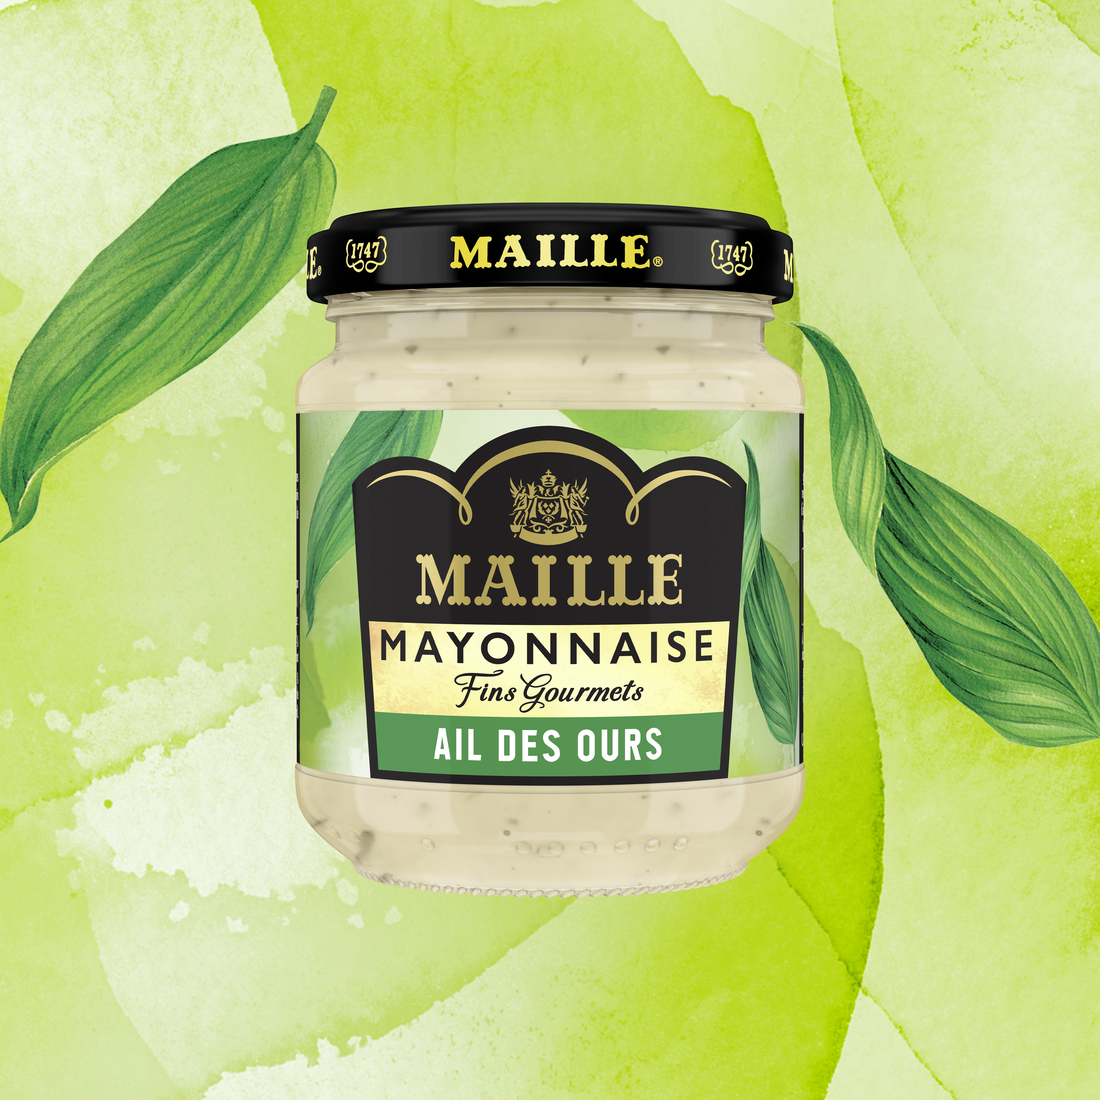 08720182536297 MAILLE Mayonnaise Fins Gourmets Ail des ours KV Colorful